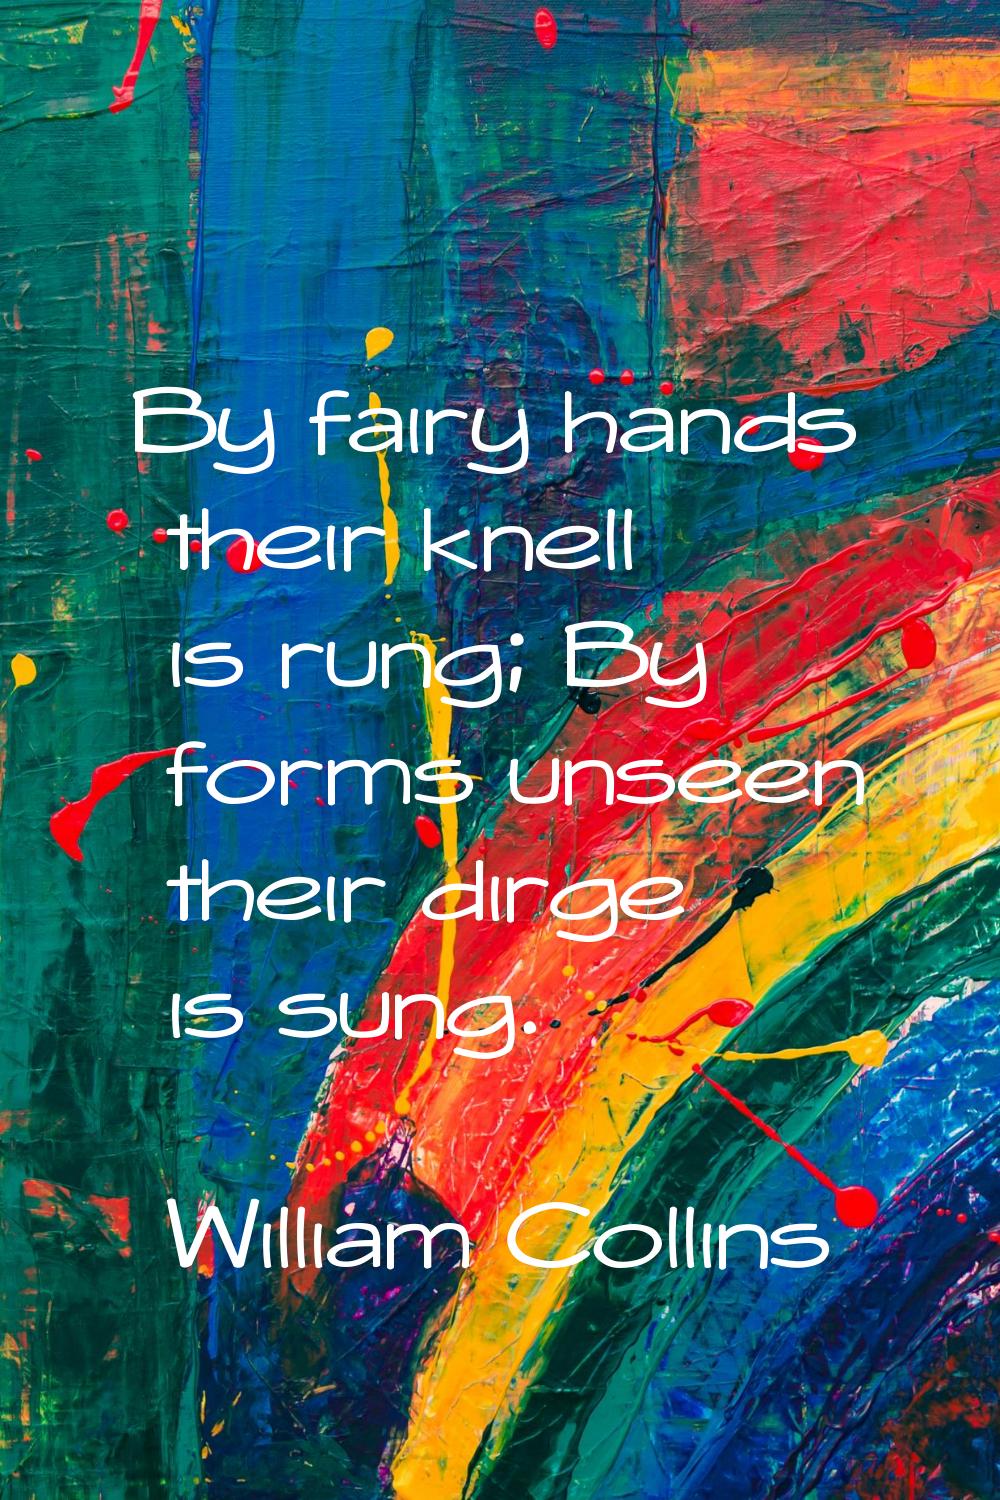 By fairy hands their knell is rung; By forms unseen their dirge is sung.